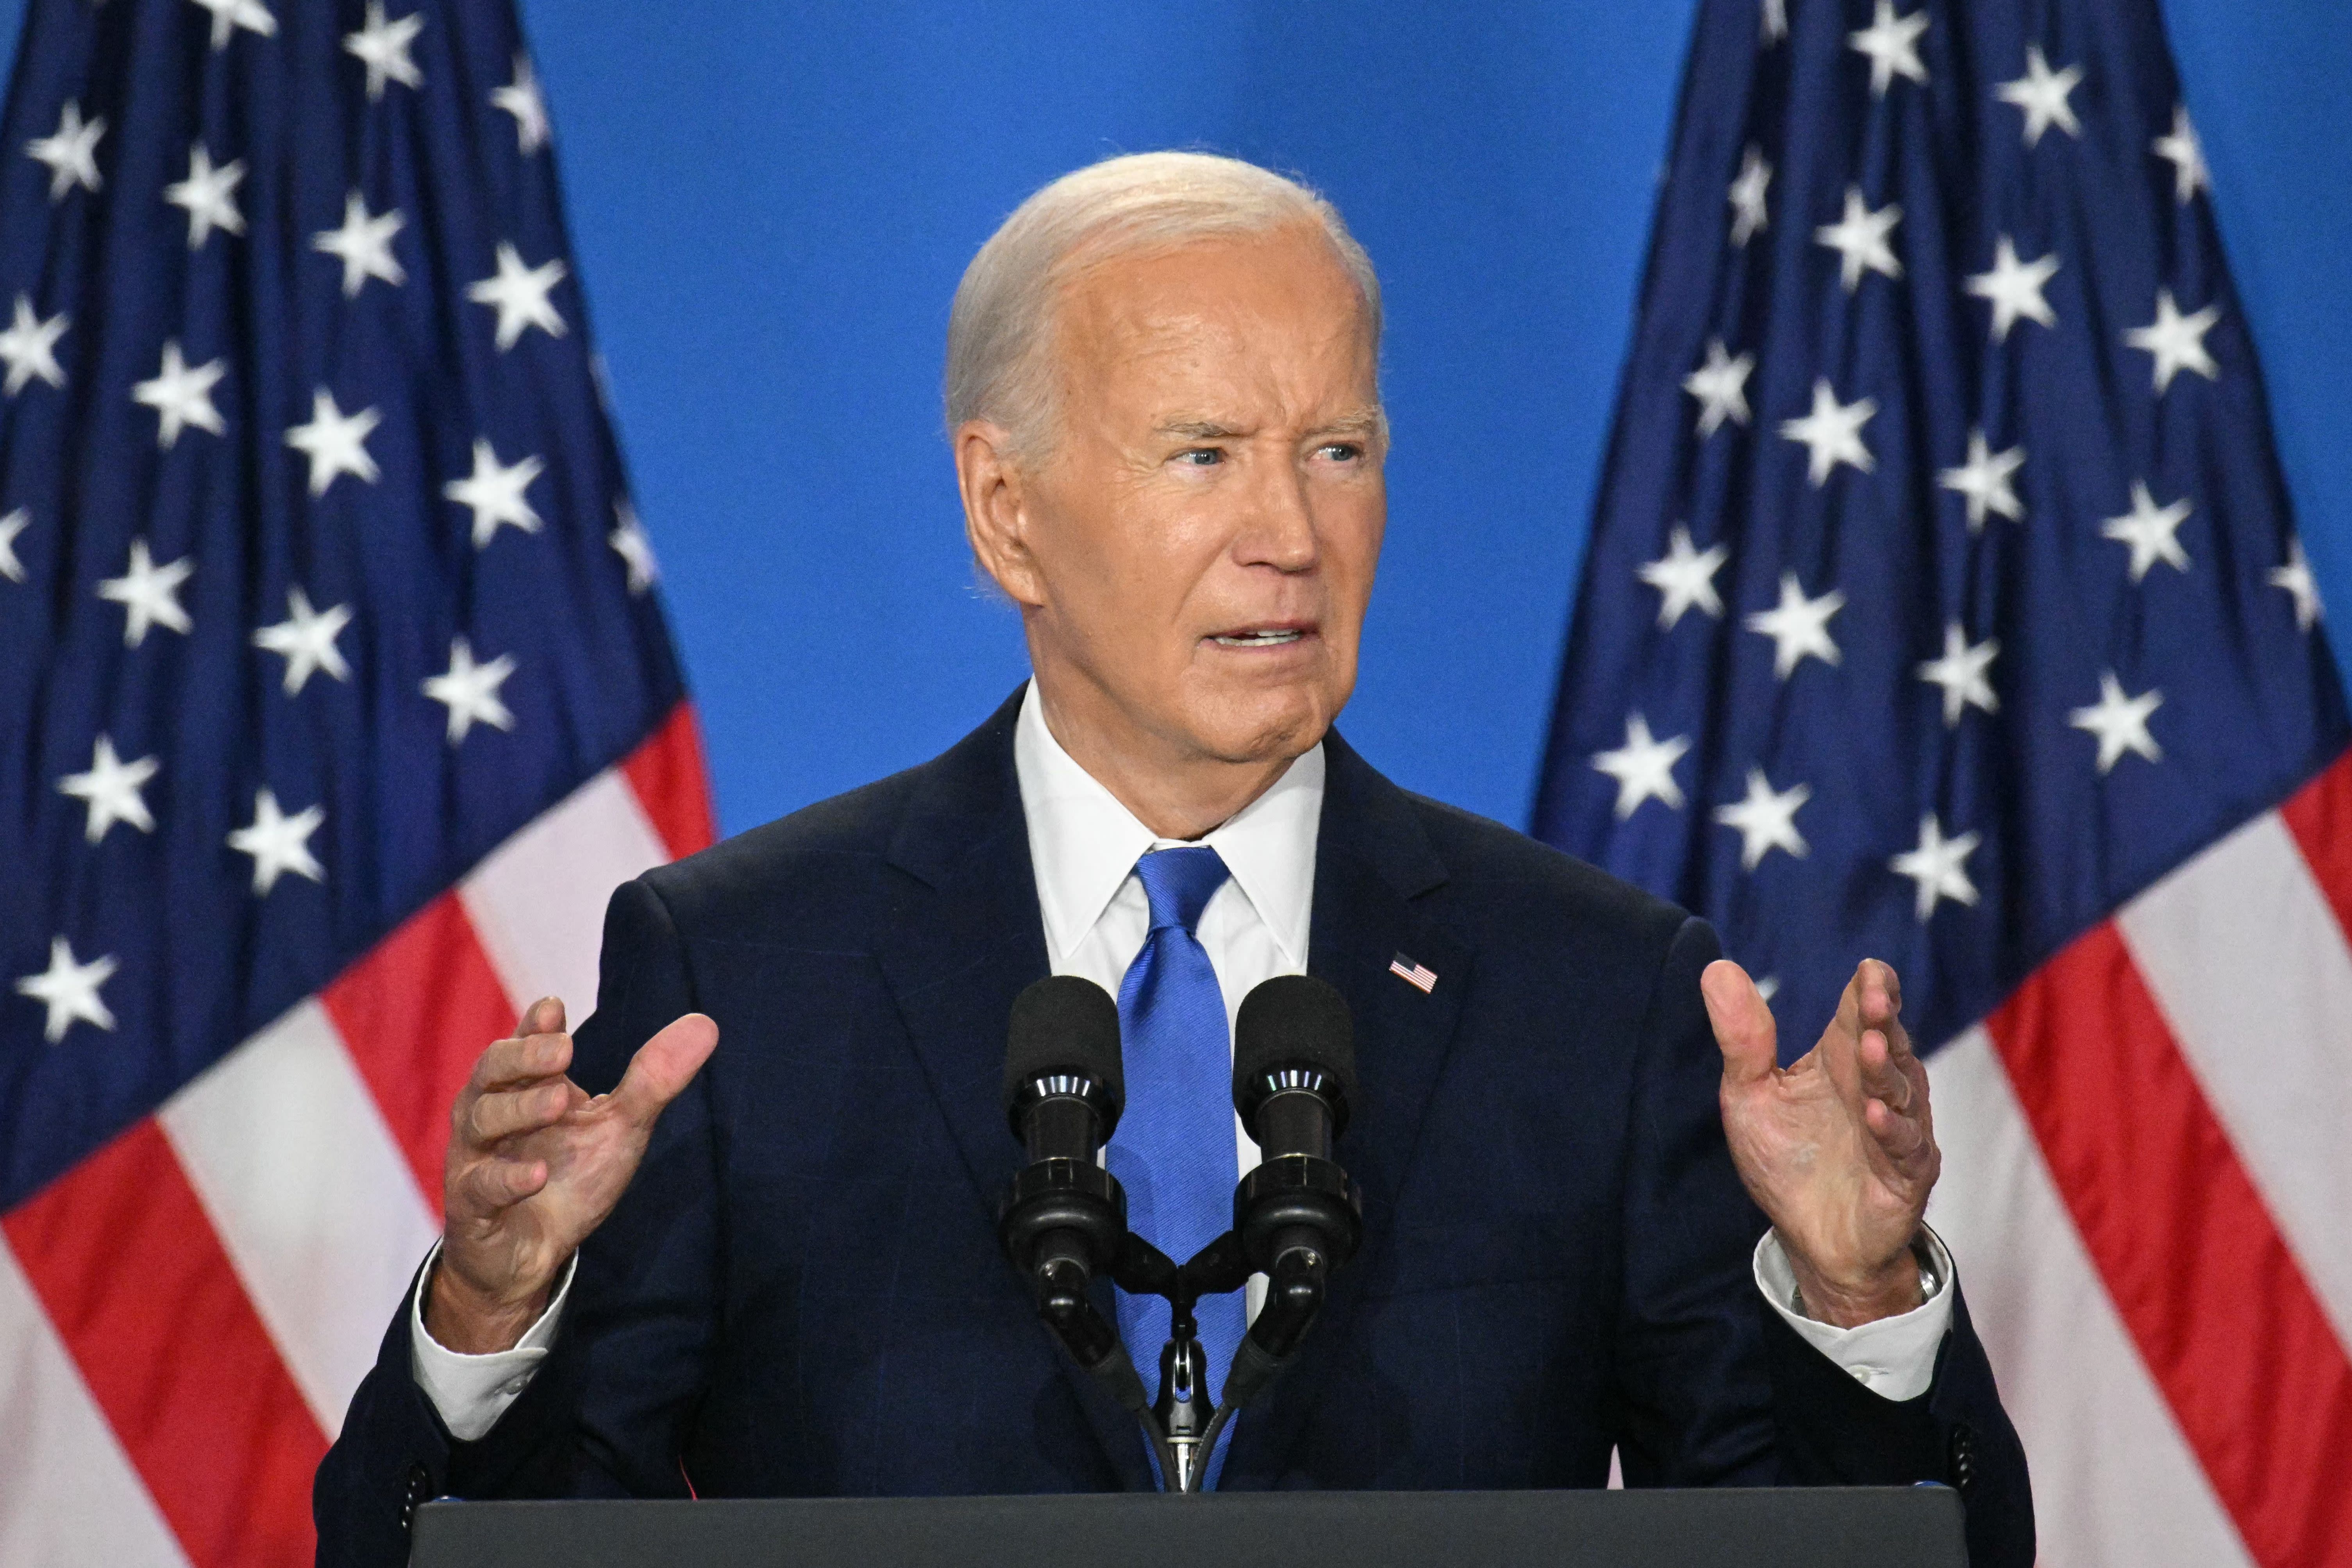 Mark Hamill, Kathy Griffin, Julia Louis-Dreyfus and More Hollywood Reactions to President Biden’s Decision to Drop Out: ‘He Restored...